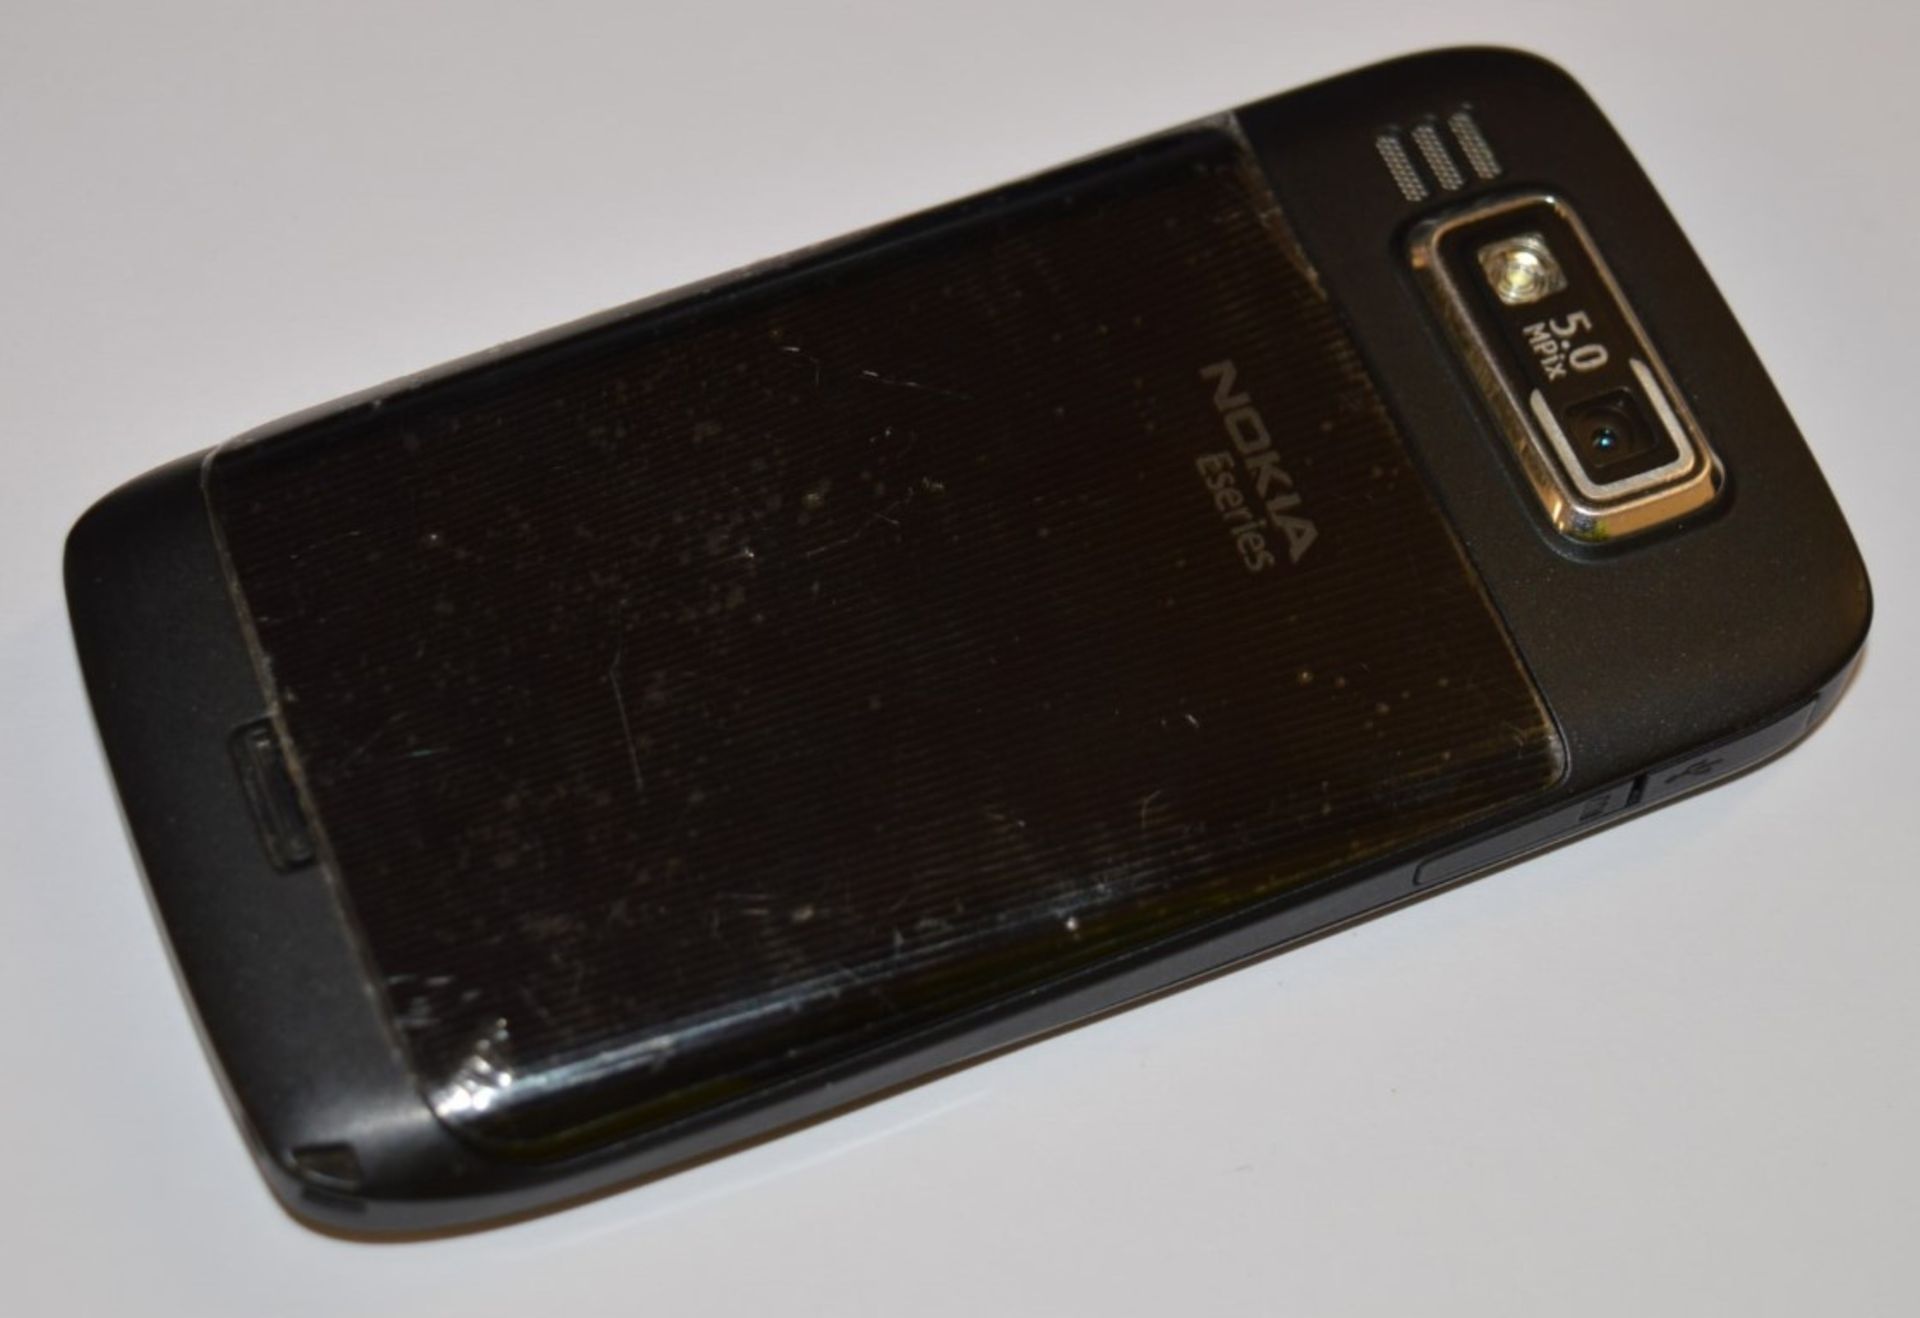 1 x Nokia E72 Mobile Phone Handset With Charger - Features Qwerty Keyboard, 600mhz CPU, 250mb Storag - Image 2 of 6